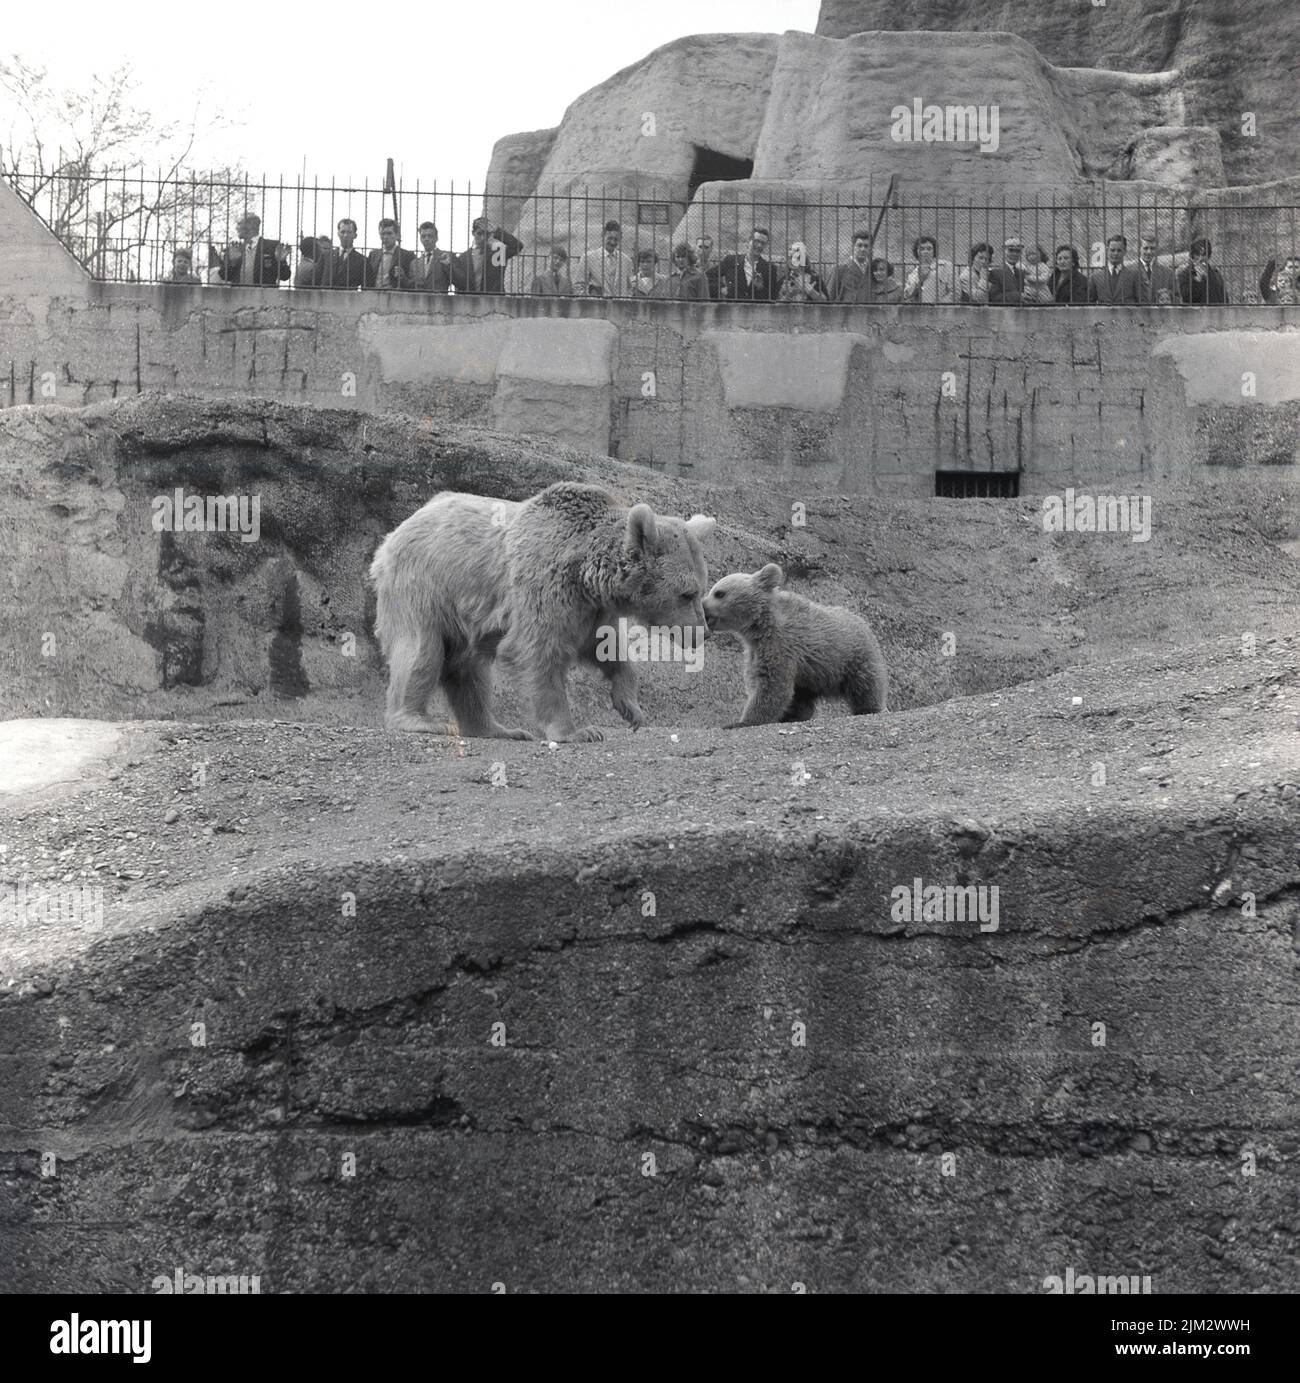 1960s, historical, on the Mappin Terraces at London Zoo, a polar bear with cub, with visitors looking down. The coat of the mother bear has been cut half-way on her body.  The terraces were built between 1913-1914 out of reinforced concrete and these rugged imitation mountains, designed to create a more natural environment for the captive animals, were innovative for the time. Stock Photo